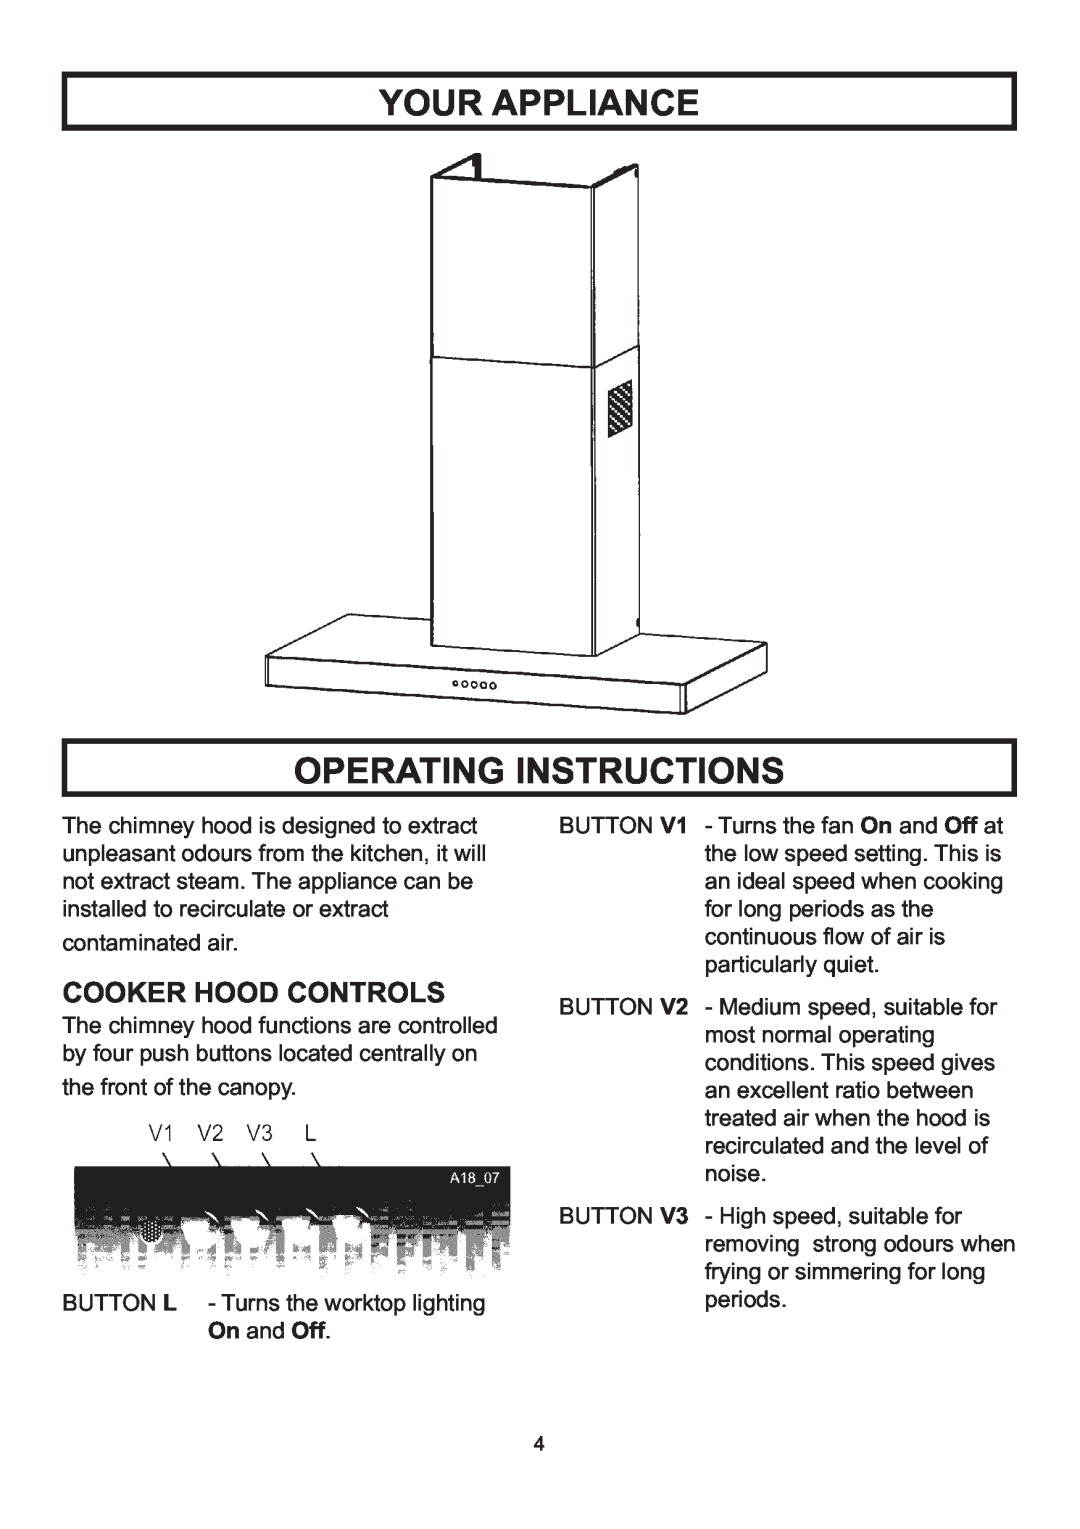 Rangemaster LEIHDS120SC installation instructions Your Appliance Operating Instructions, Cooker Hood Controls 